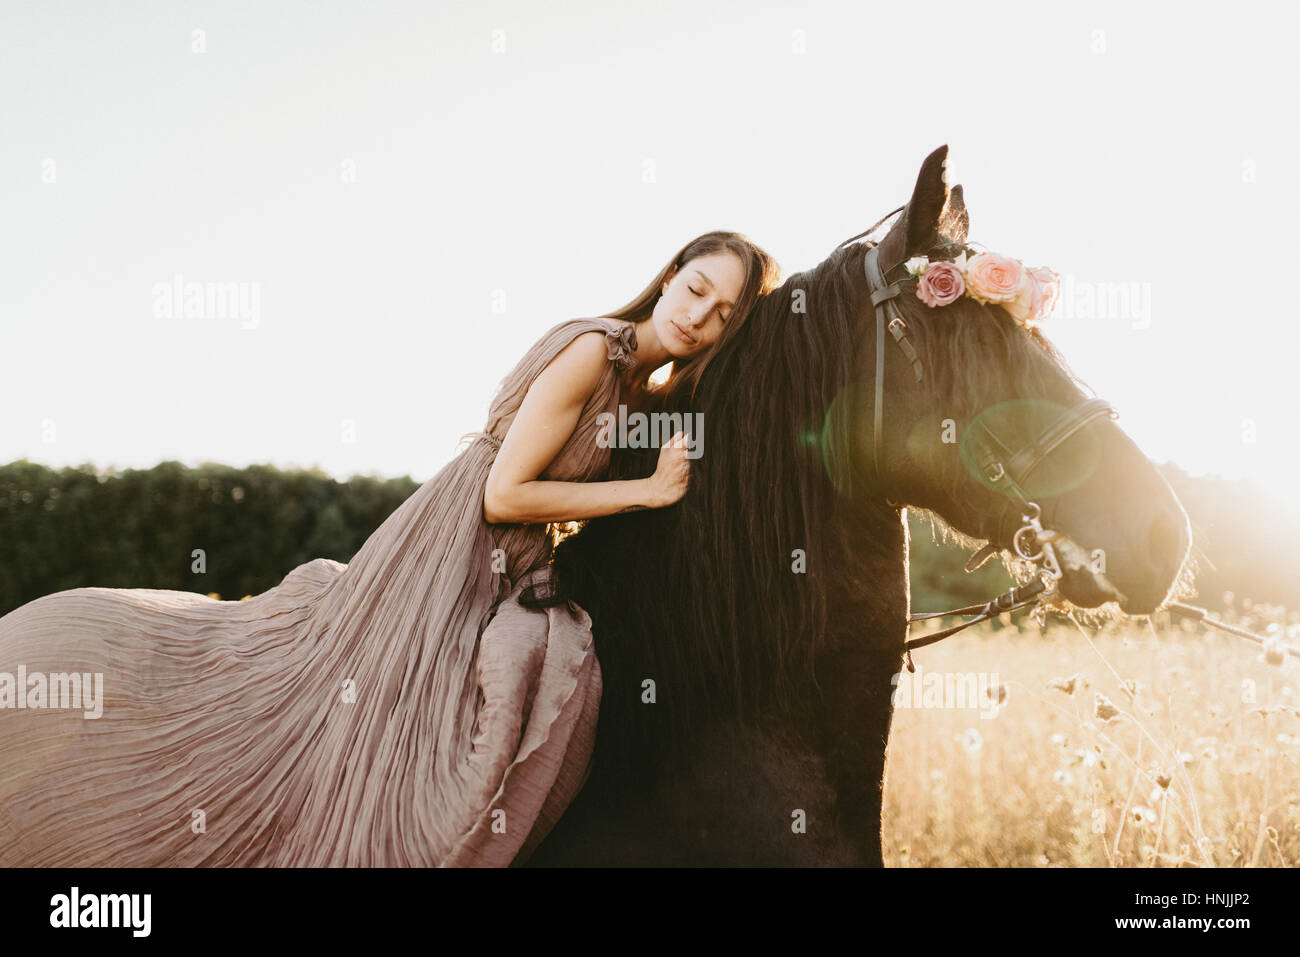 Caucasian woman wearing a beige flowy dress sitting on a black horse, dreaming, contemplating Stock Photo